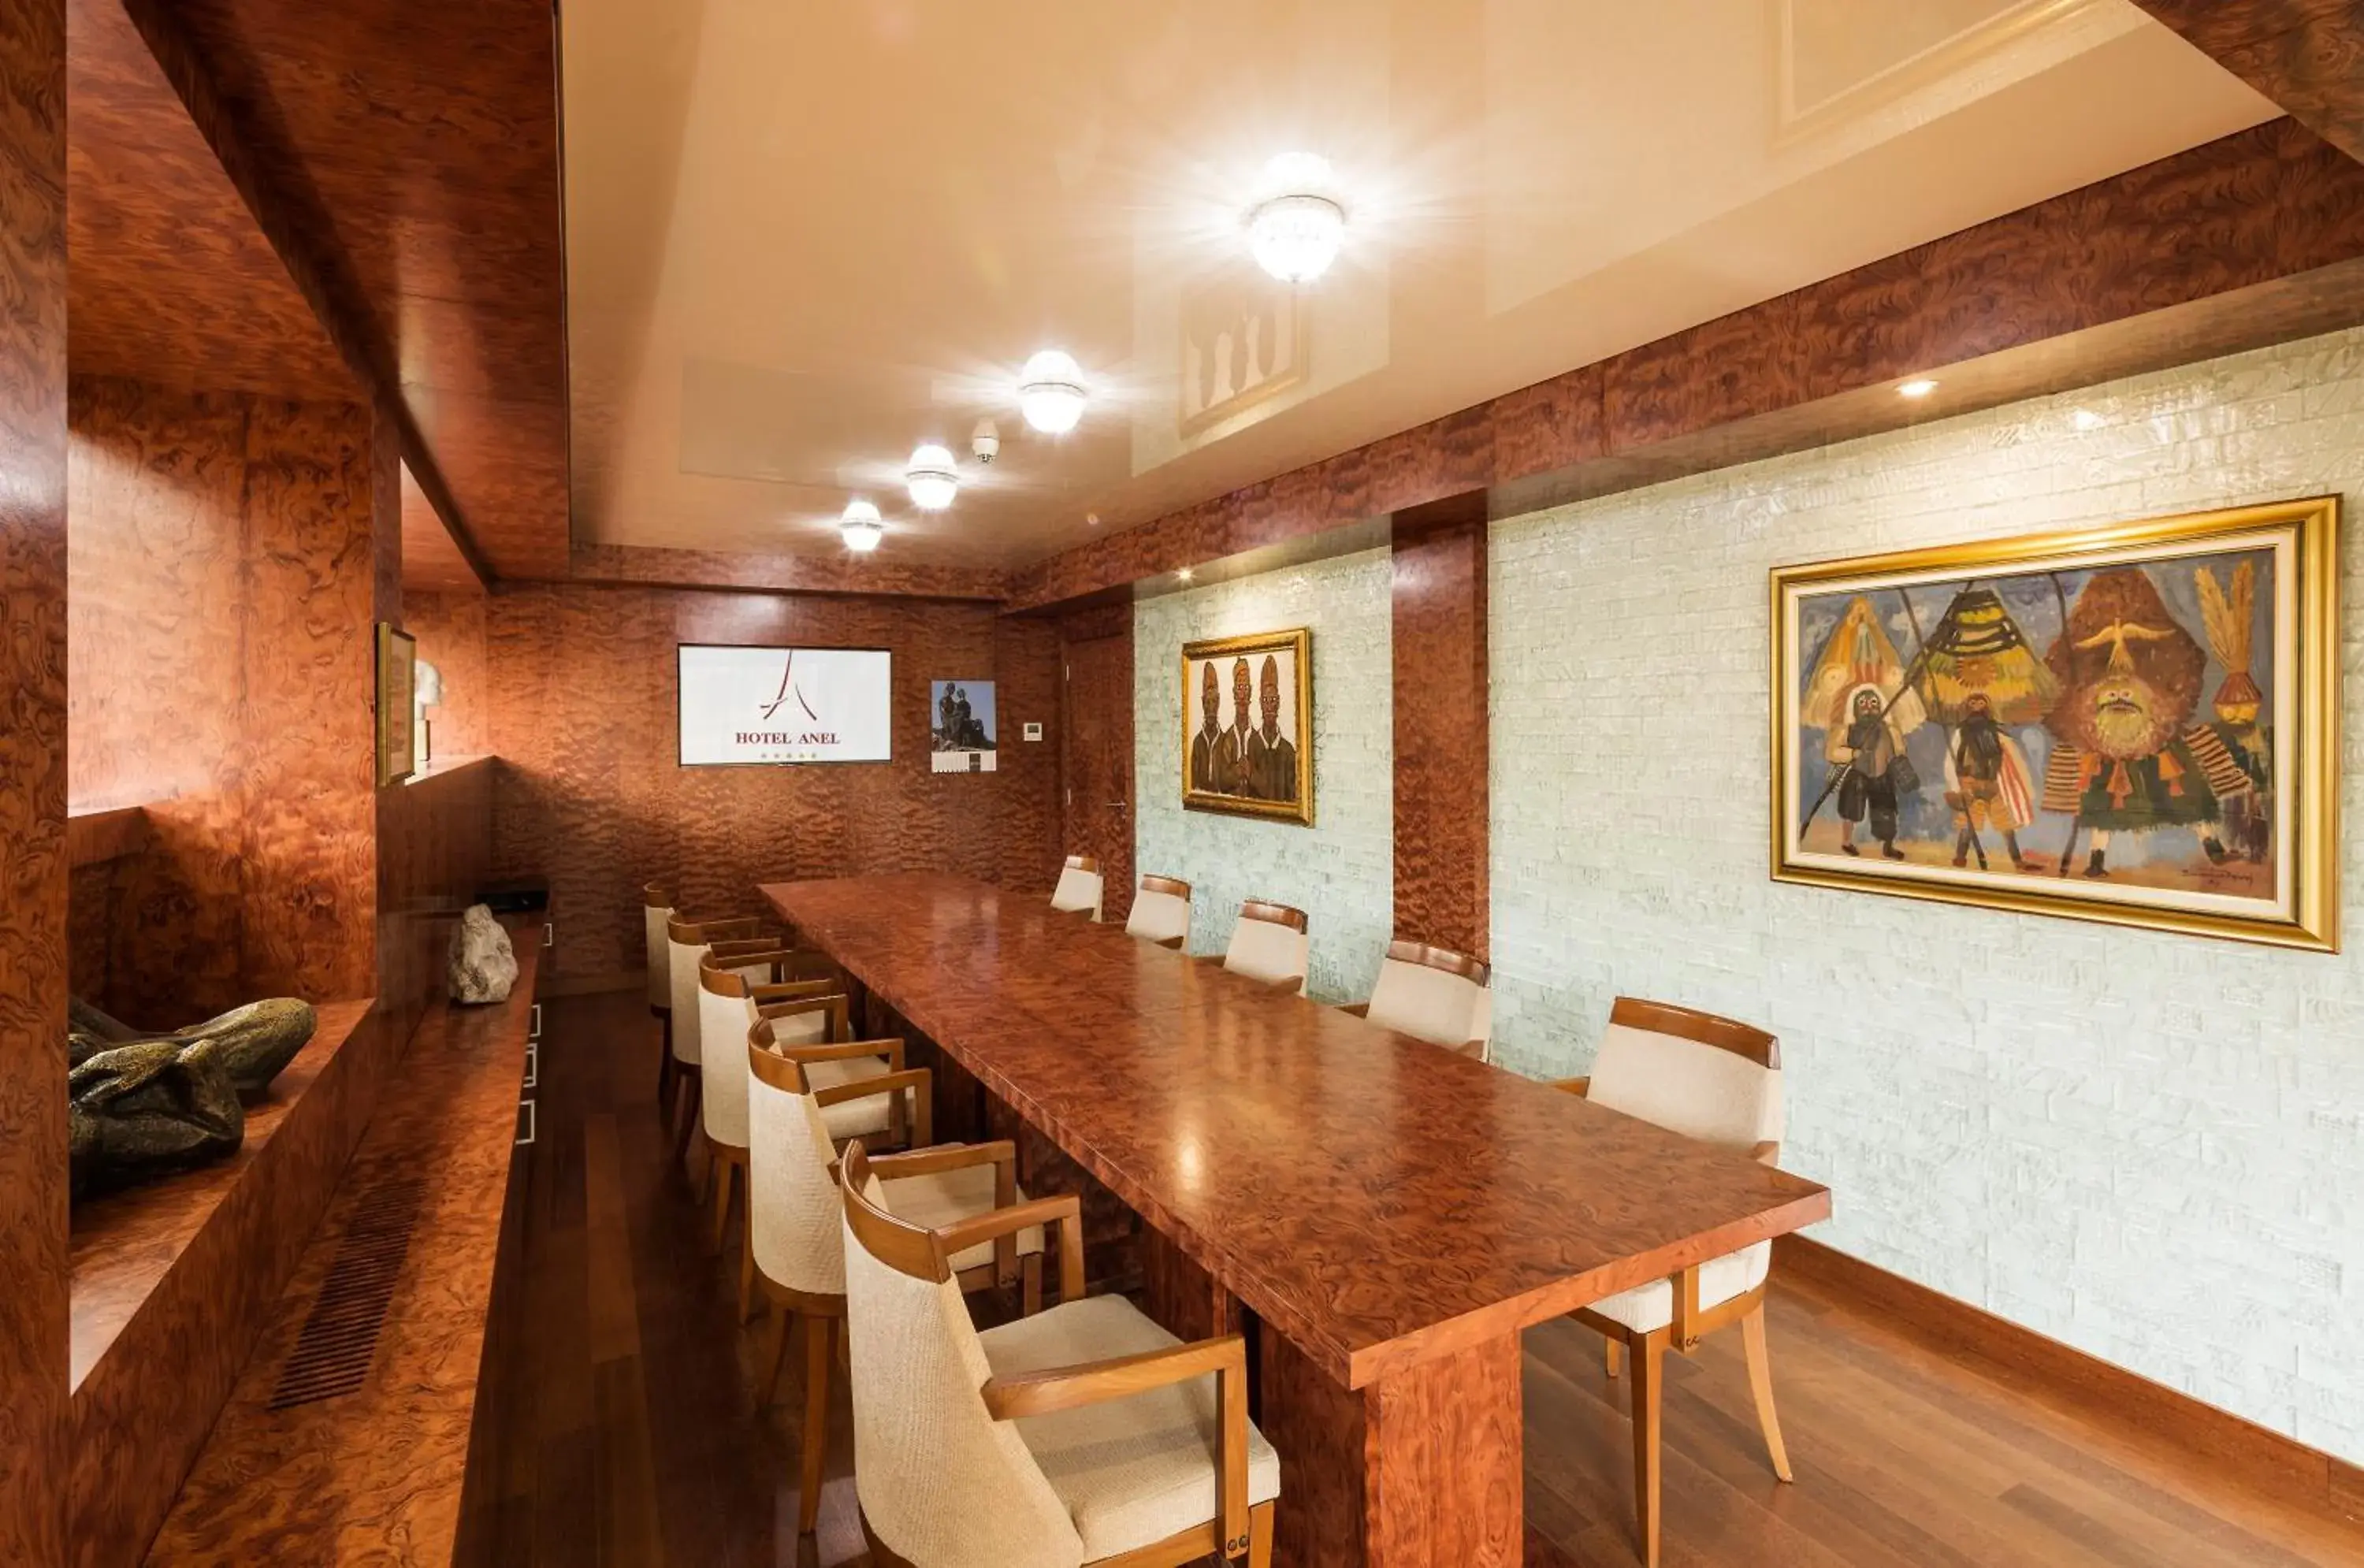 Meeting/conference room, Lounge/Bar in Hotel Anel